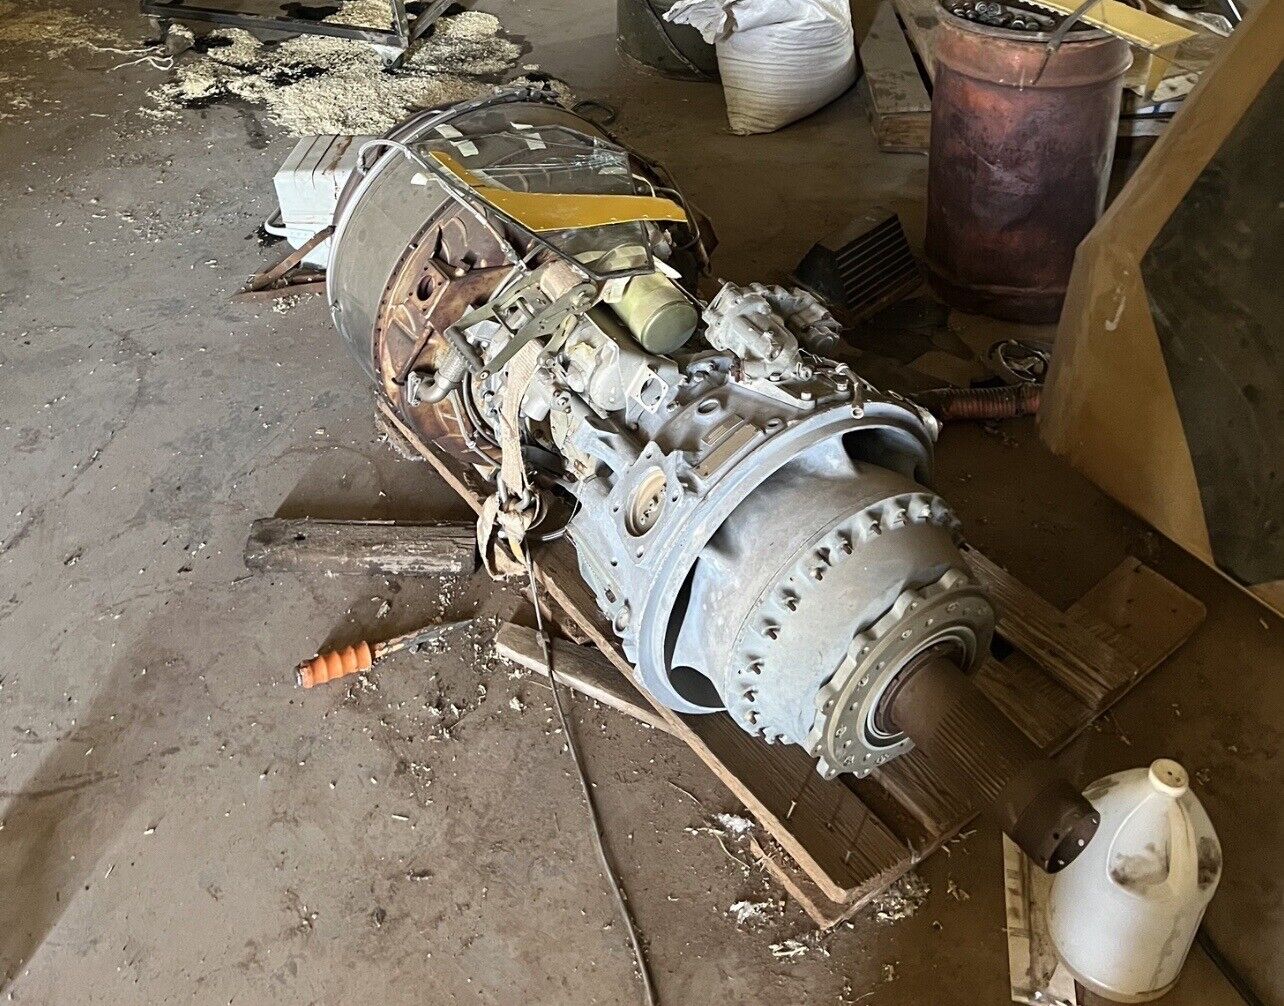 LYCOMING T-53 TURBINE, AS IS, With Brand New Reduction Gear Assembly. NO LOGS